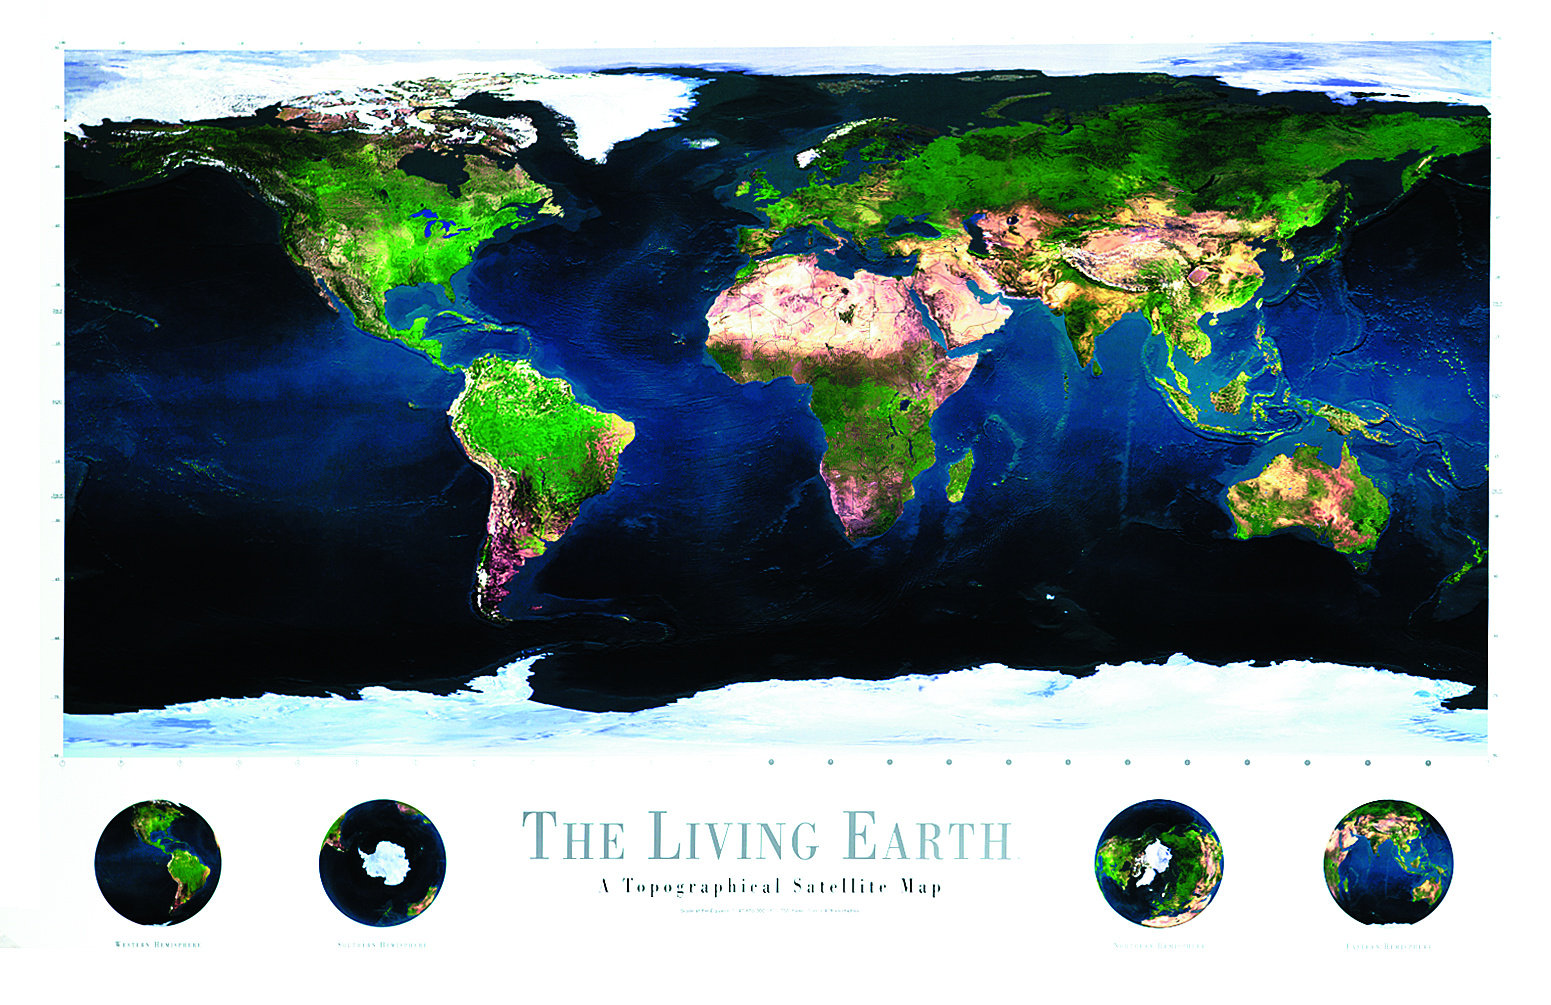 Earth Map - Living Earth Map as seen from space